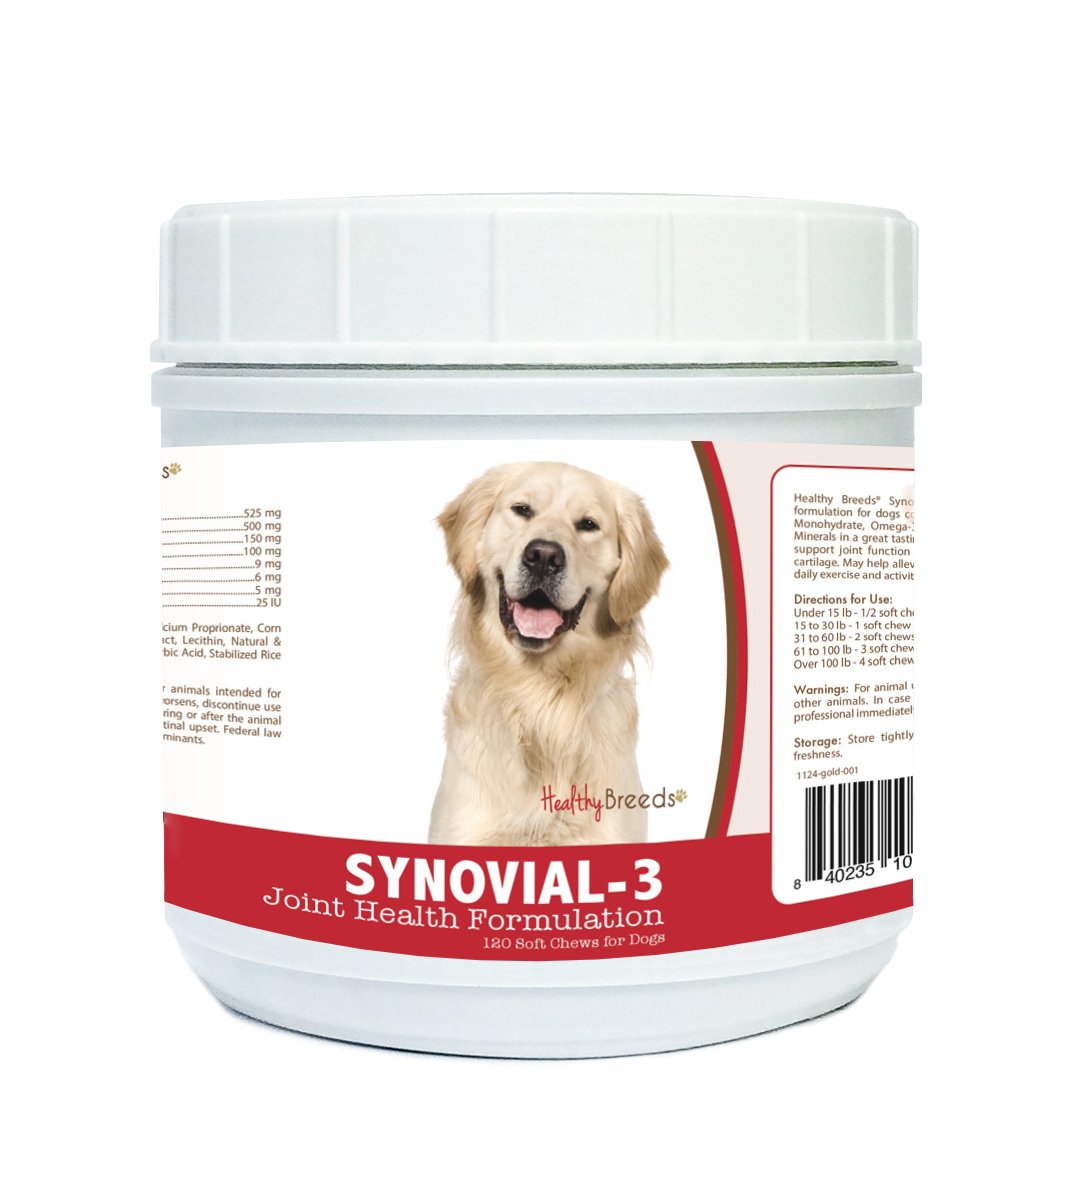 Picture of Healthy Breeds 840235107897 Golden Retriever Synovial-3 Joint Health Formulation - 120 count